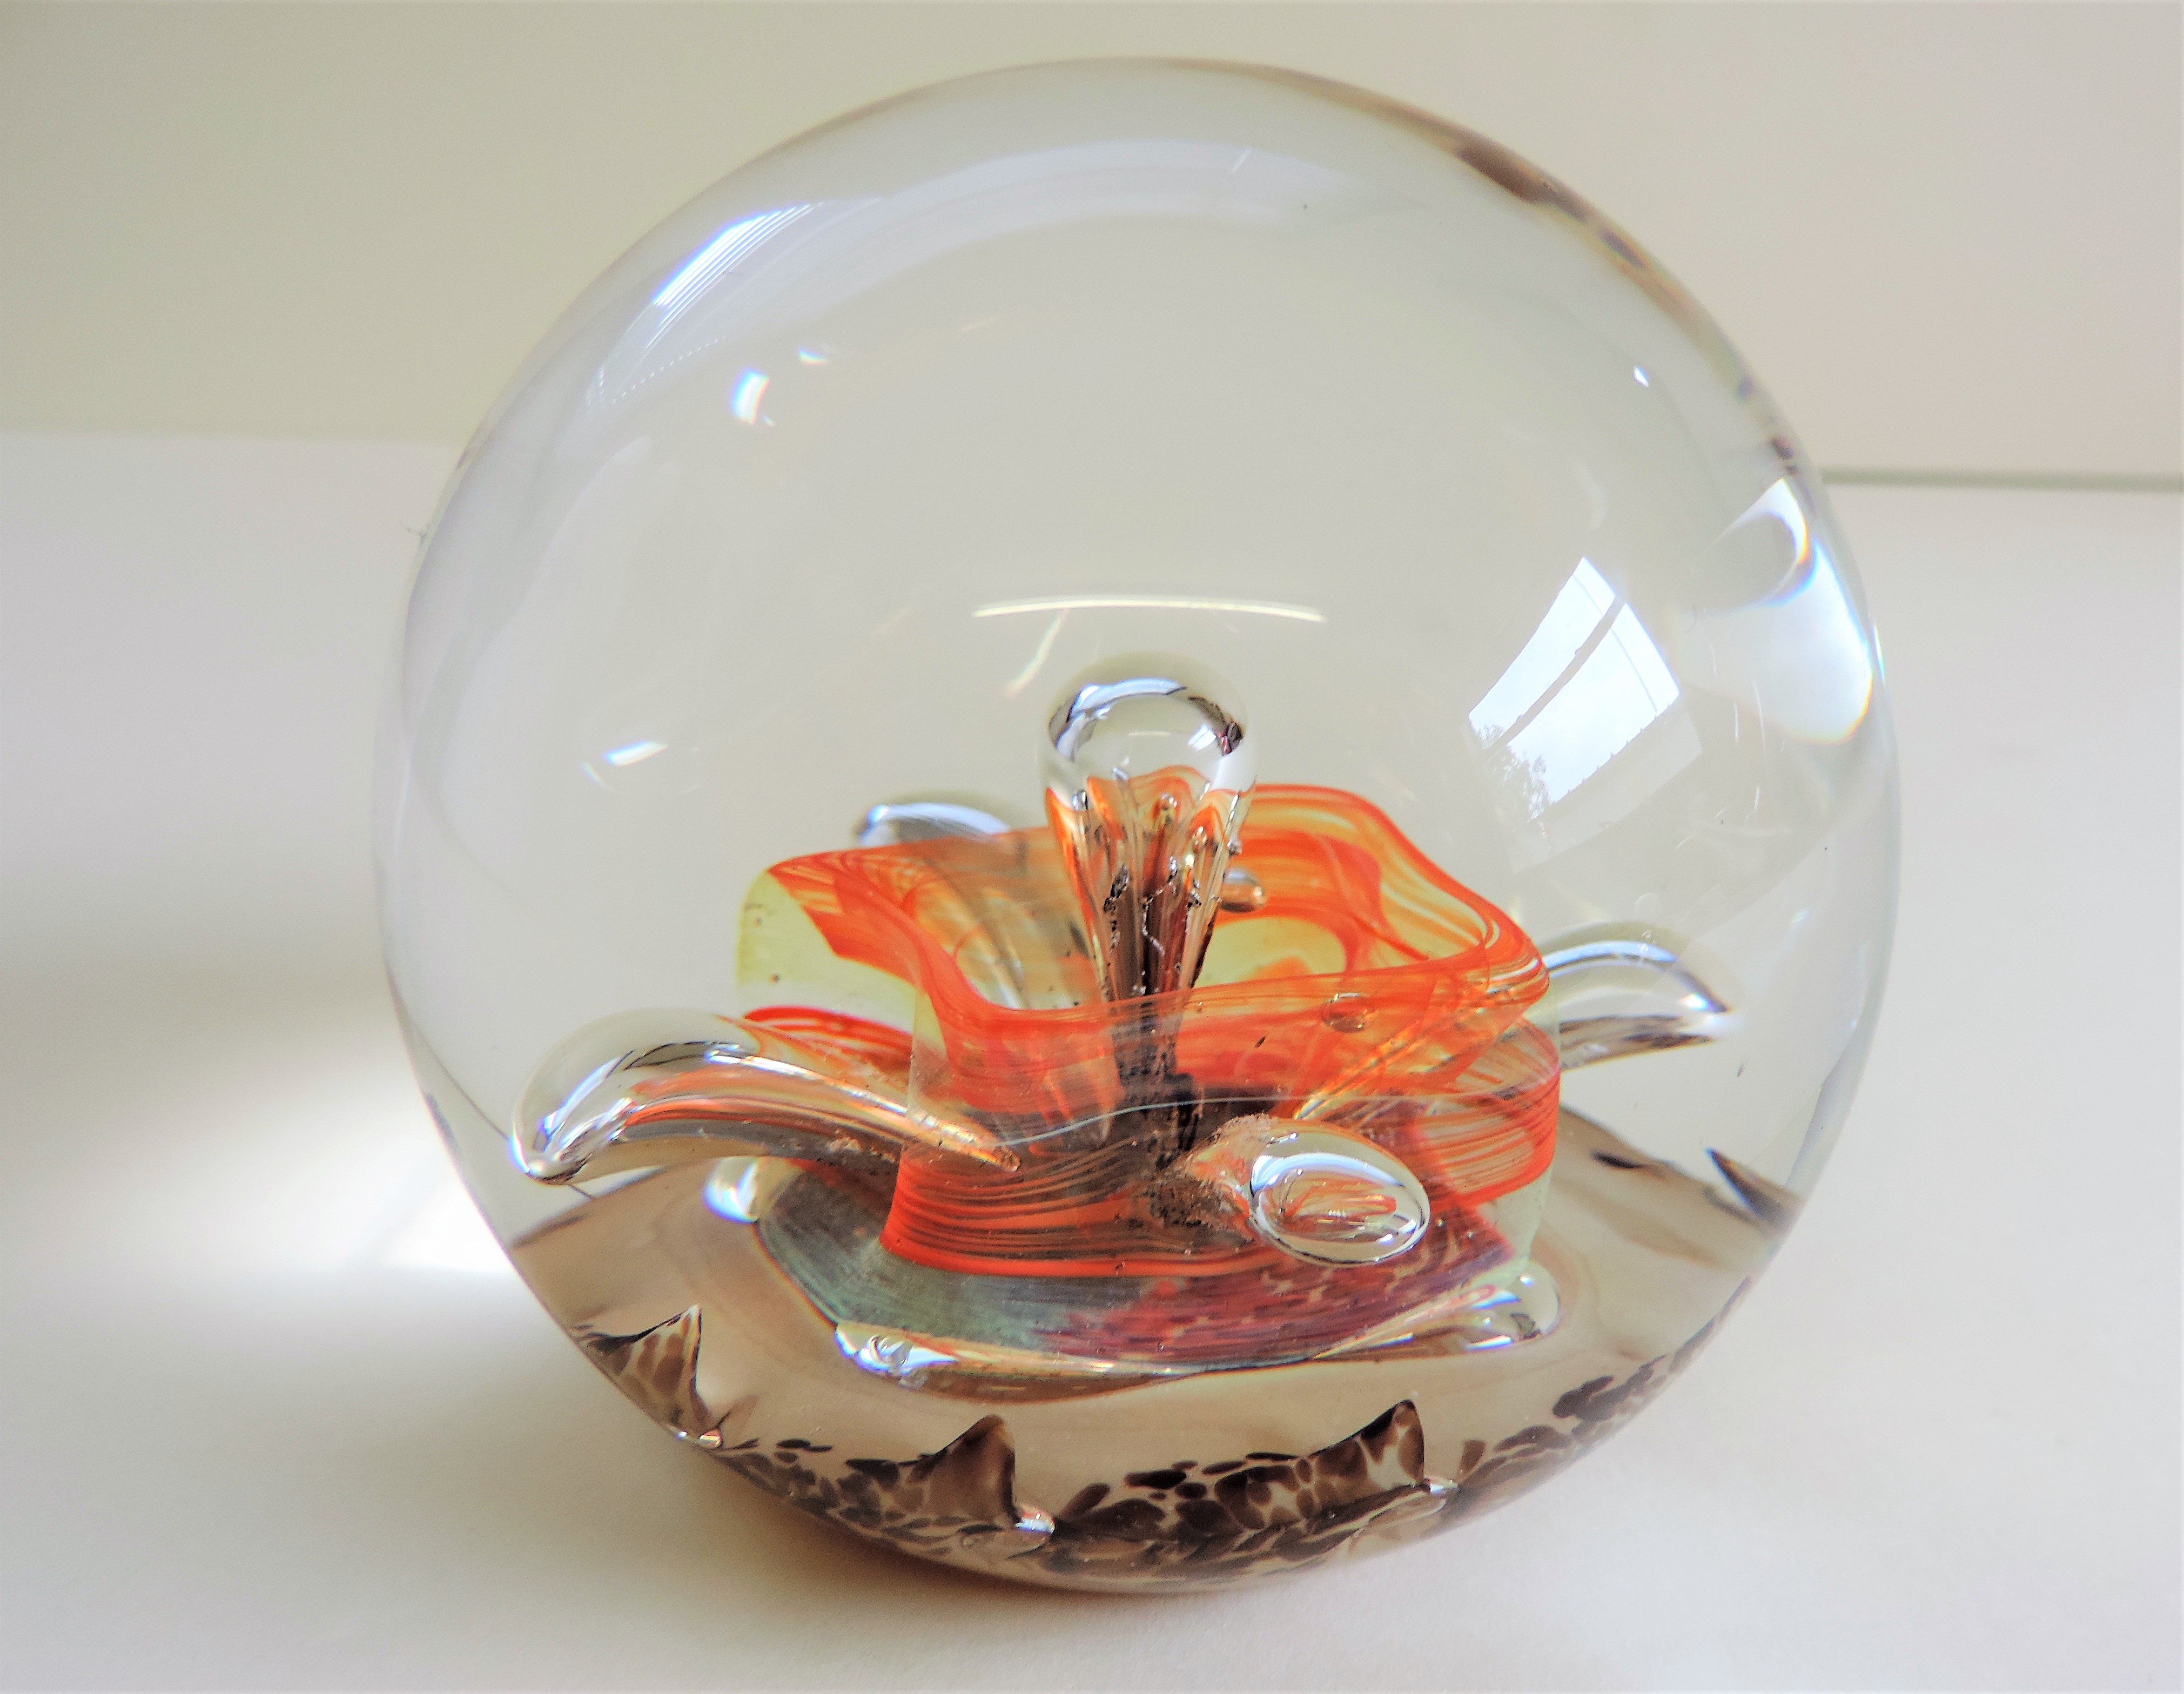 Vintage Selkirk Glass Paperweight 1989 Signed on Base